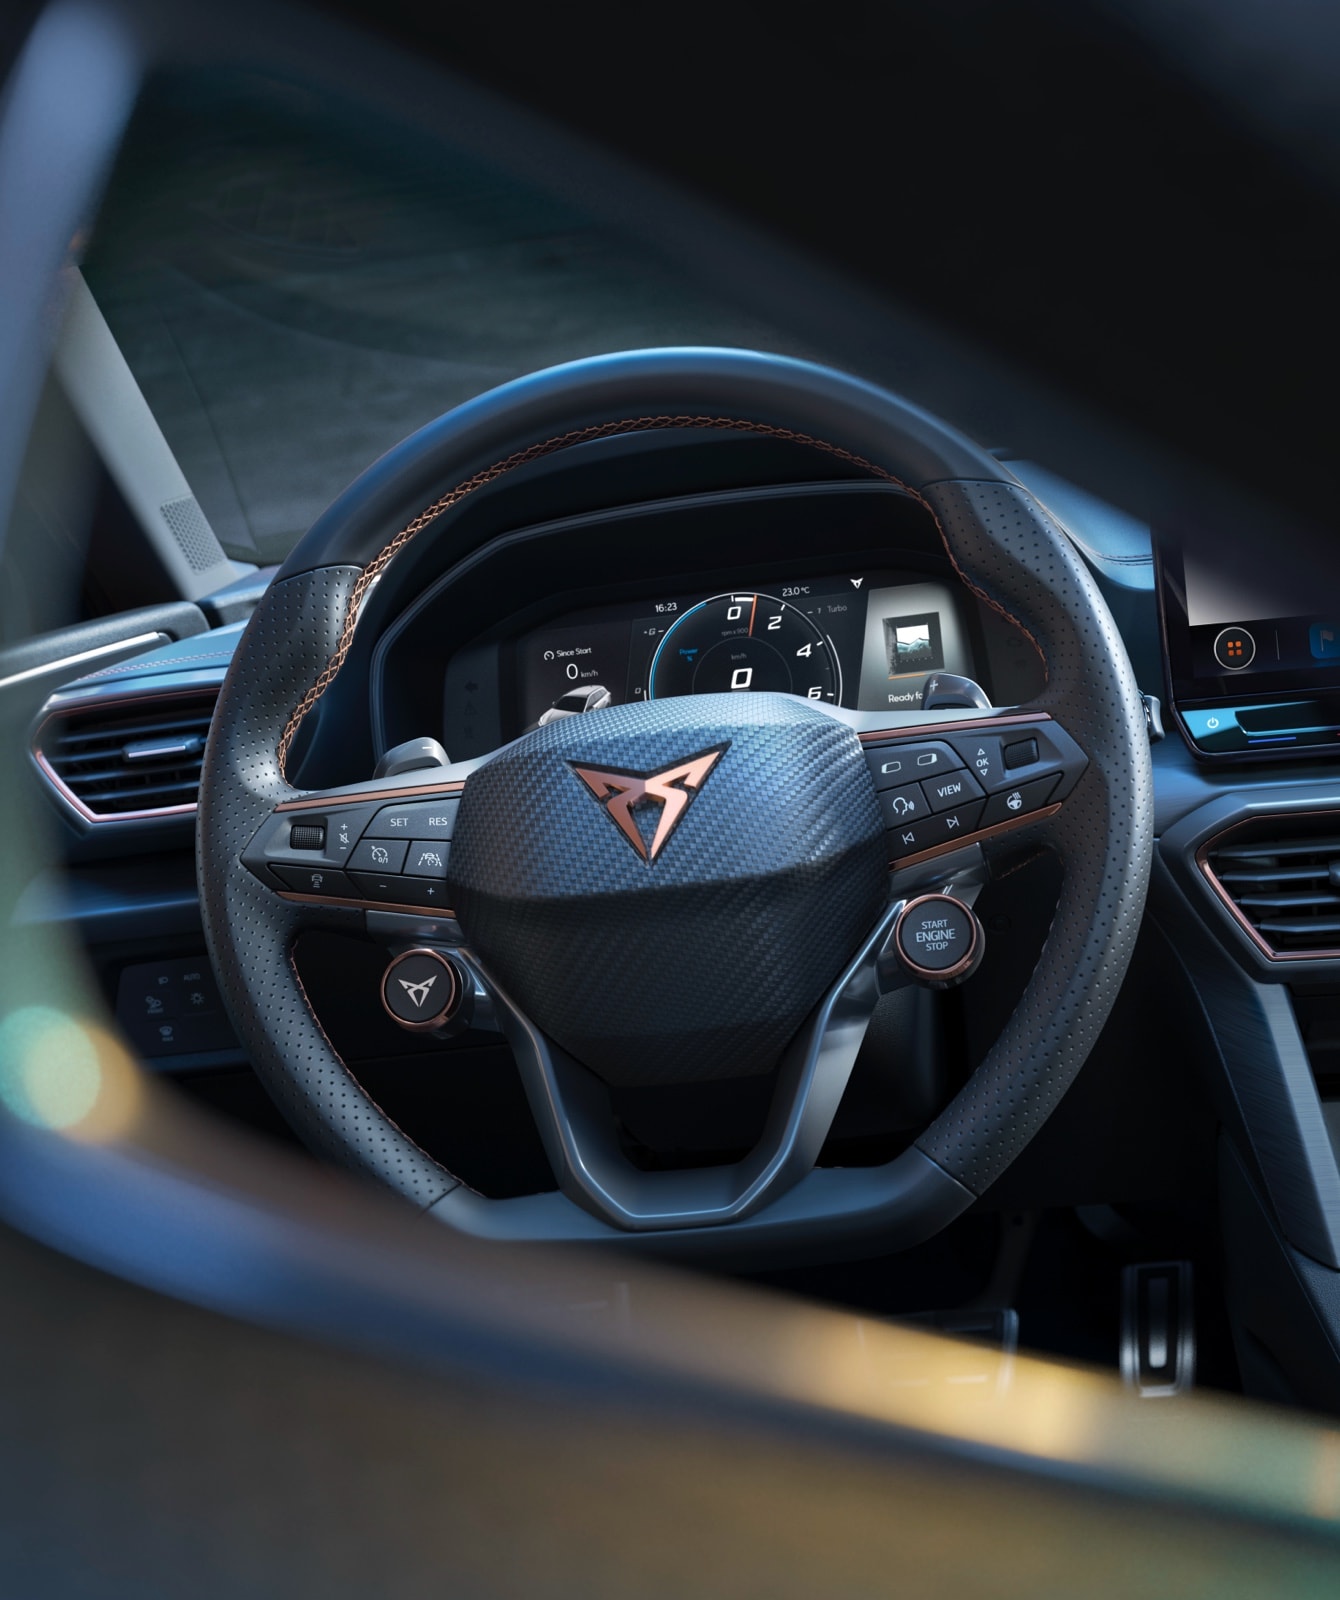 cupra-leon-ehybrid-leather-steering-wheel-with-satellite-buttons